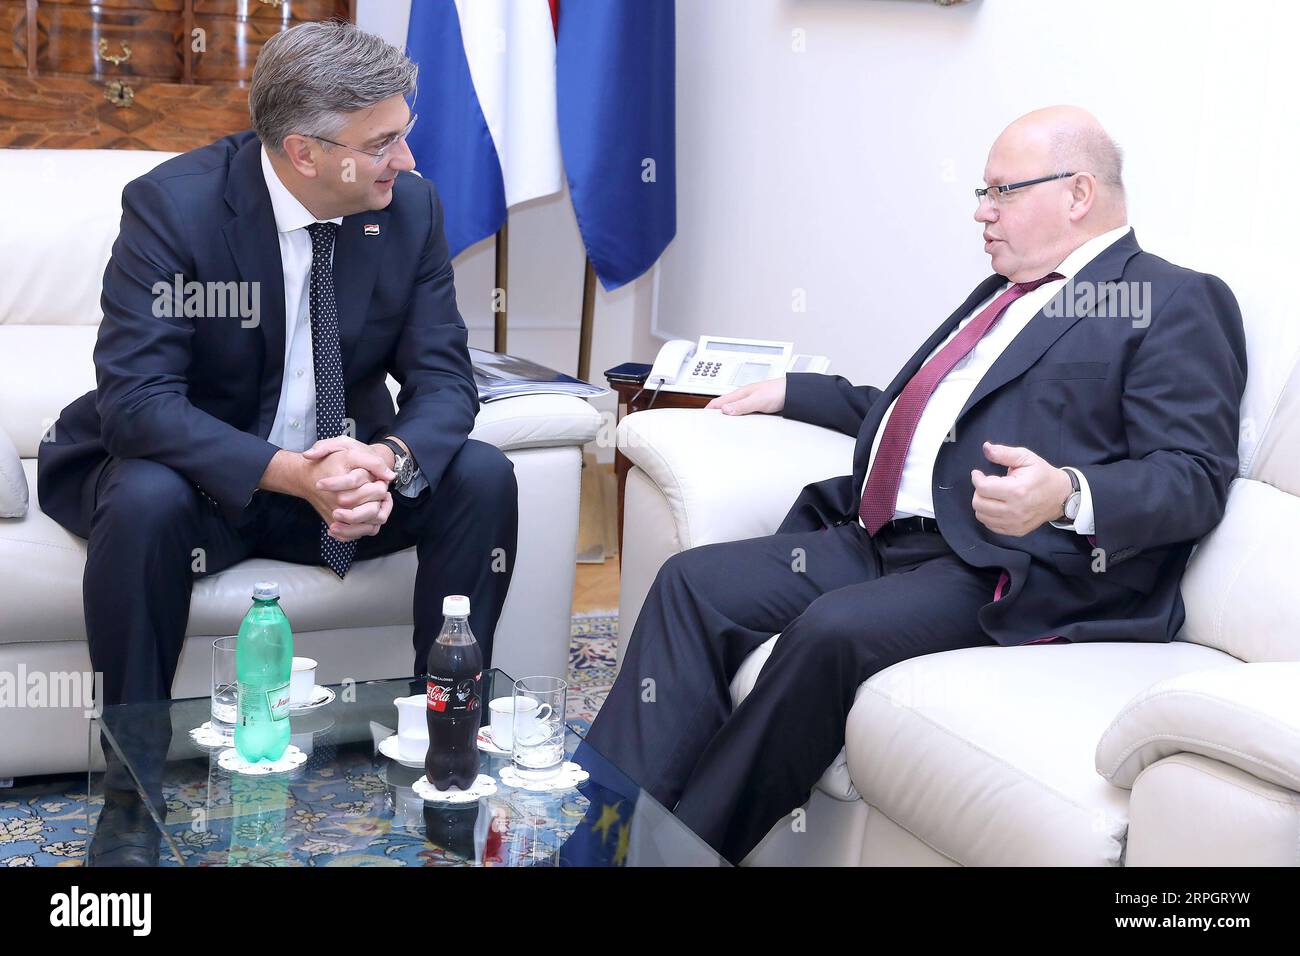 191021 -- ZAGREB, Oct. 21, 2019 Xinhua -- Croatian Prime Minister Andrej Plenkovic L meets with German Federal Minister for Economic Affairs and Energy Peter Altmaier in Zagreb, Croatia, Oct. 21, 2019. Andrej Plenkovic said here on Monday that Germany is Croatia s most important economic partner and the doors are still open to German investors. Patrik Macek/Pixsell via Xinhua CROATIA-ZAGREB-GERMANY-PETER ALTMAIER-VISIT PUBLICATIONxNOTxINxCHN Stock Photo